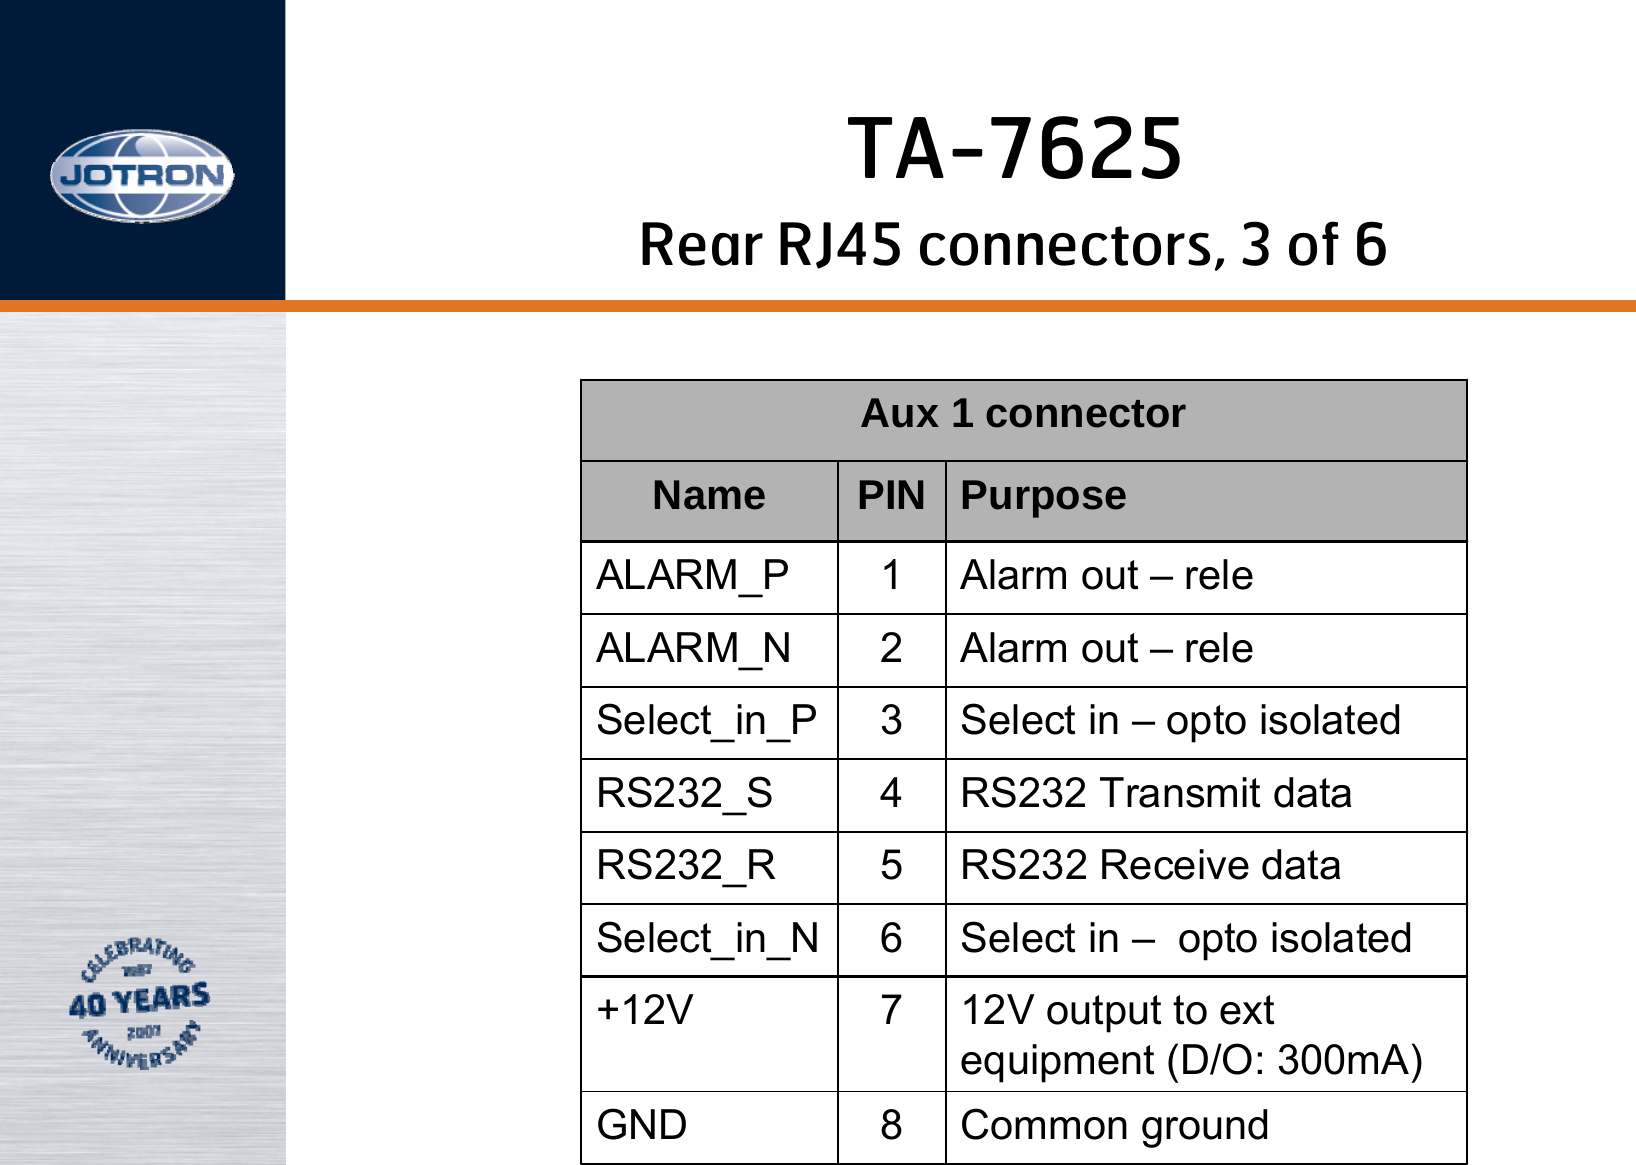 Aux 1 connectorName PIN PurposeALARM_P 1Alarm out – releALARM_N 2Alarm out – releSelect_in_P 3Select in – opto isolatedRS232_S 4RS232 Transmit dataRS232_R 5RS232 Receive dataSelect_in_N 6Select in – opto isolated+12V 712V output to extequipment (D/O: 300mA)GND 8Common ground Rear RJ45 connectors, 3 of 6TA-7625